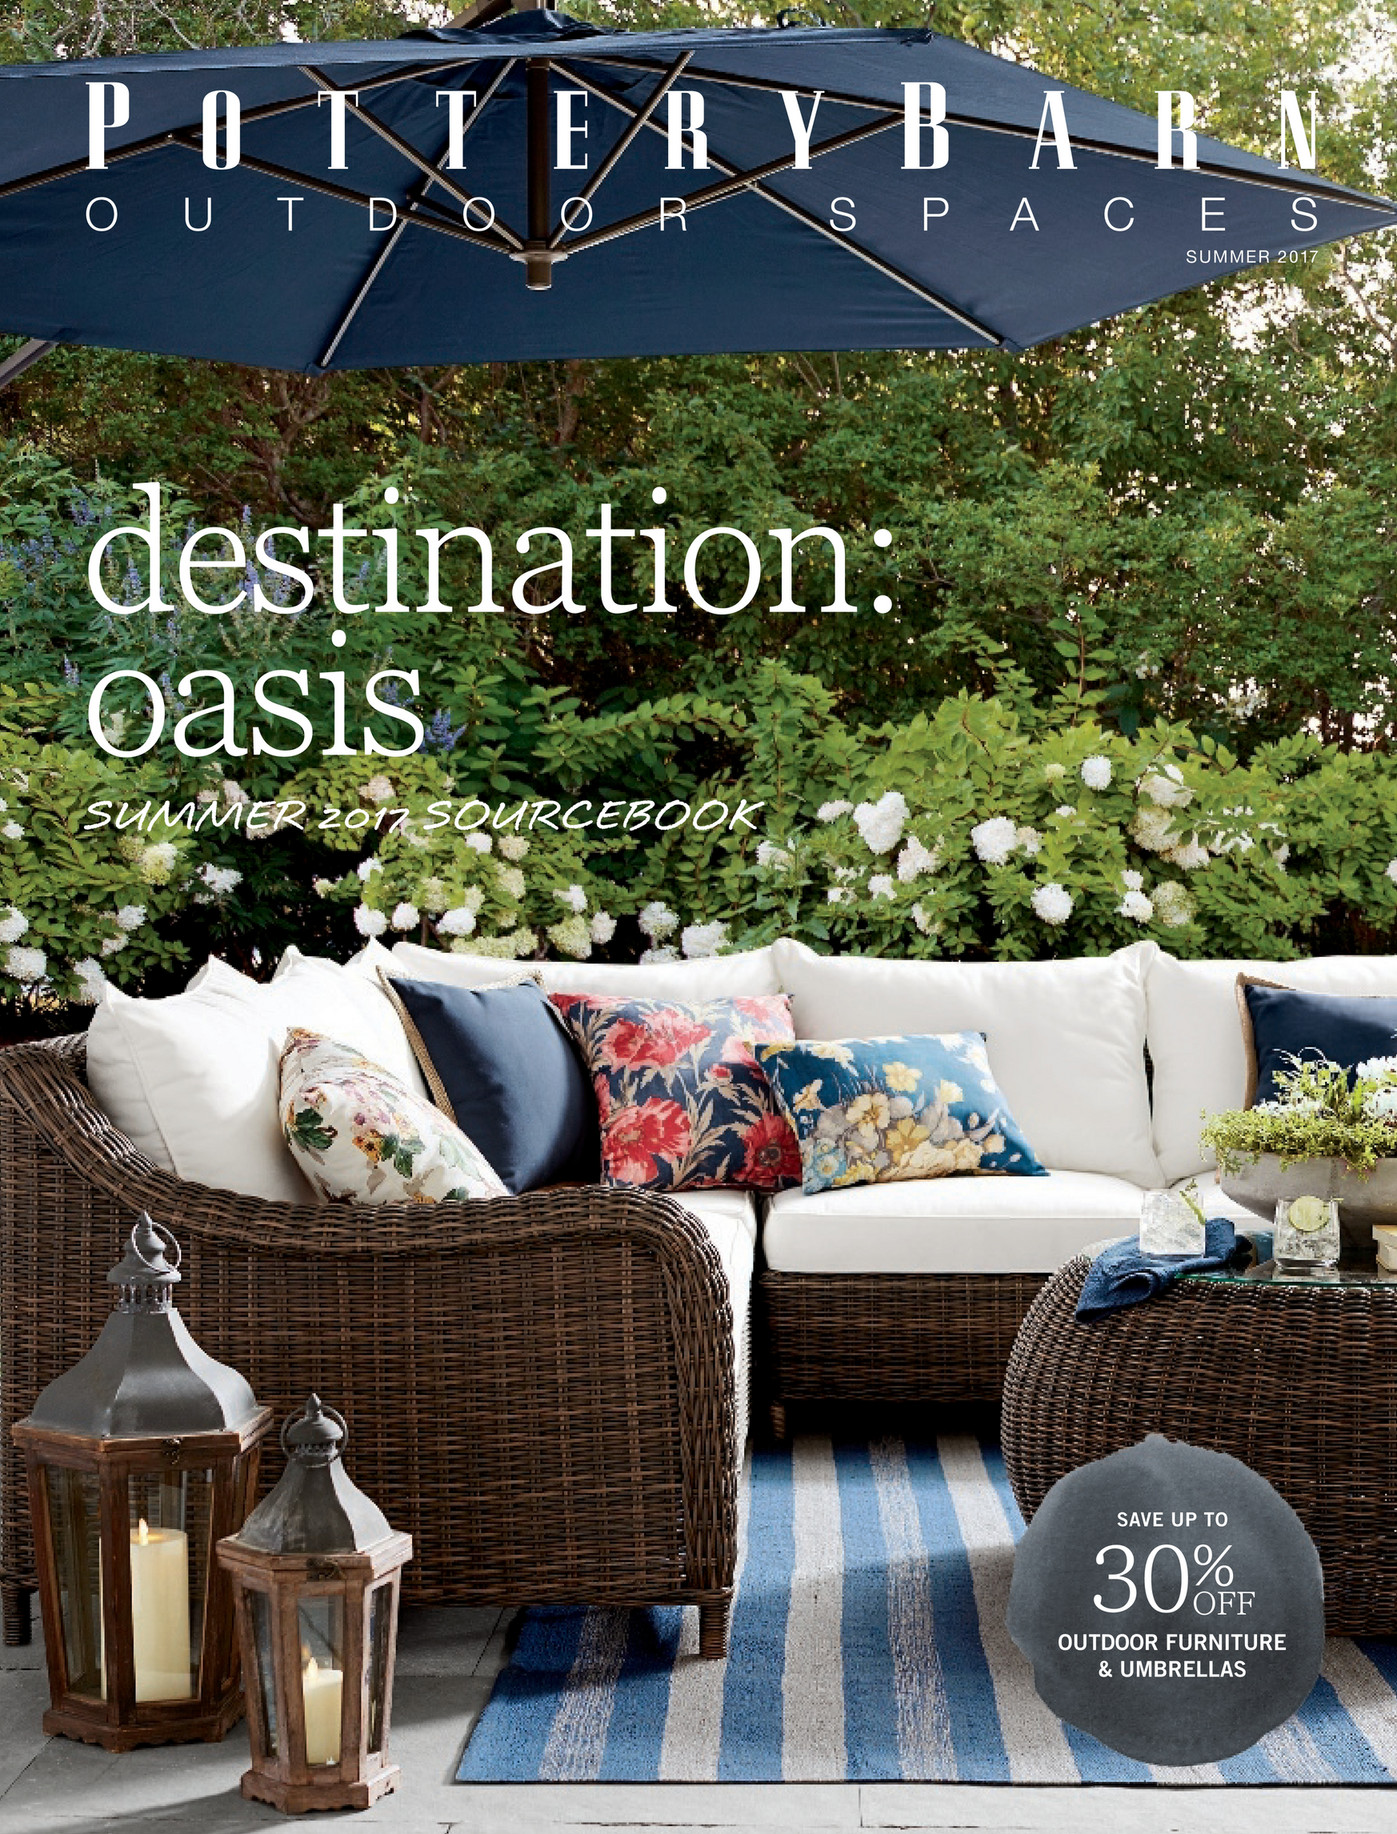 Pottery Barn Outdoor 2017 D2 Page 92 93